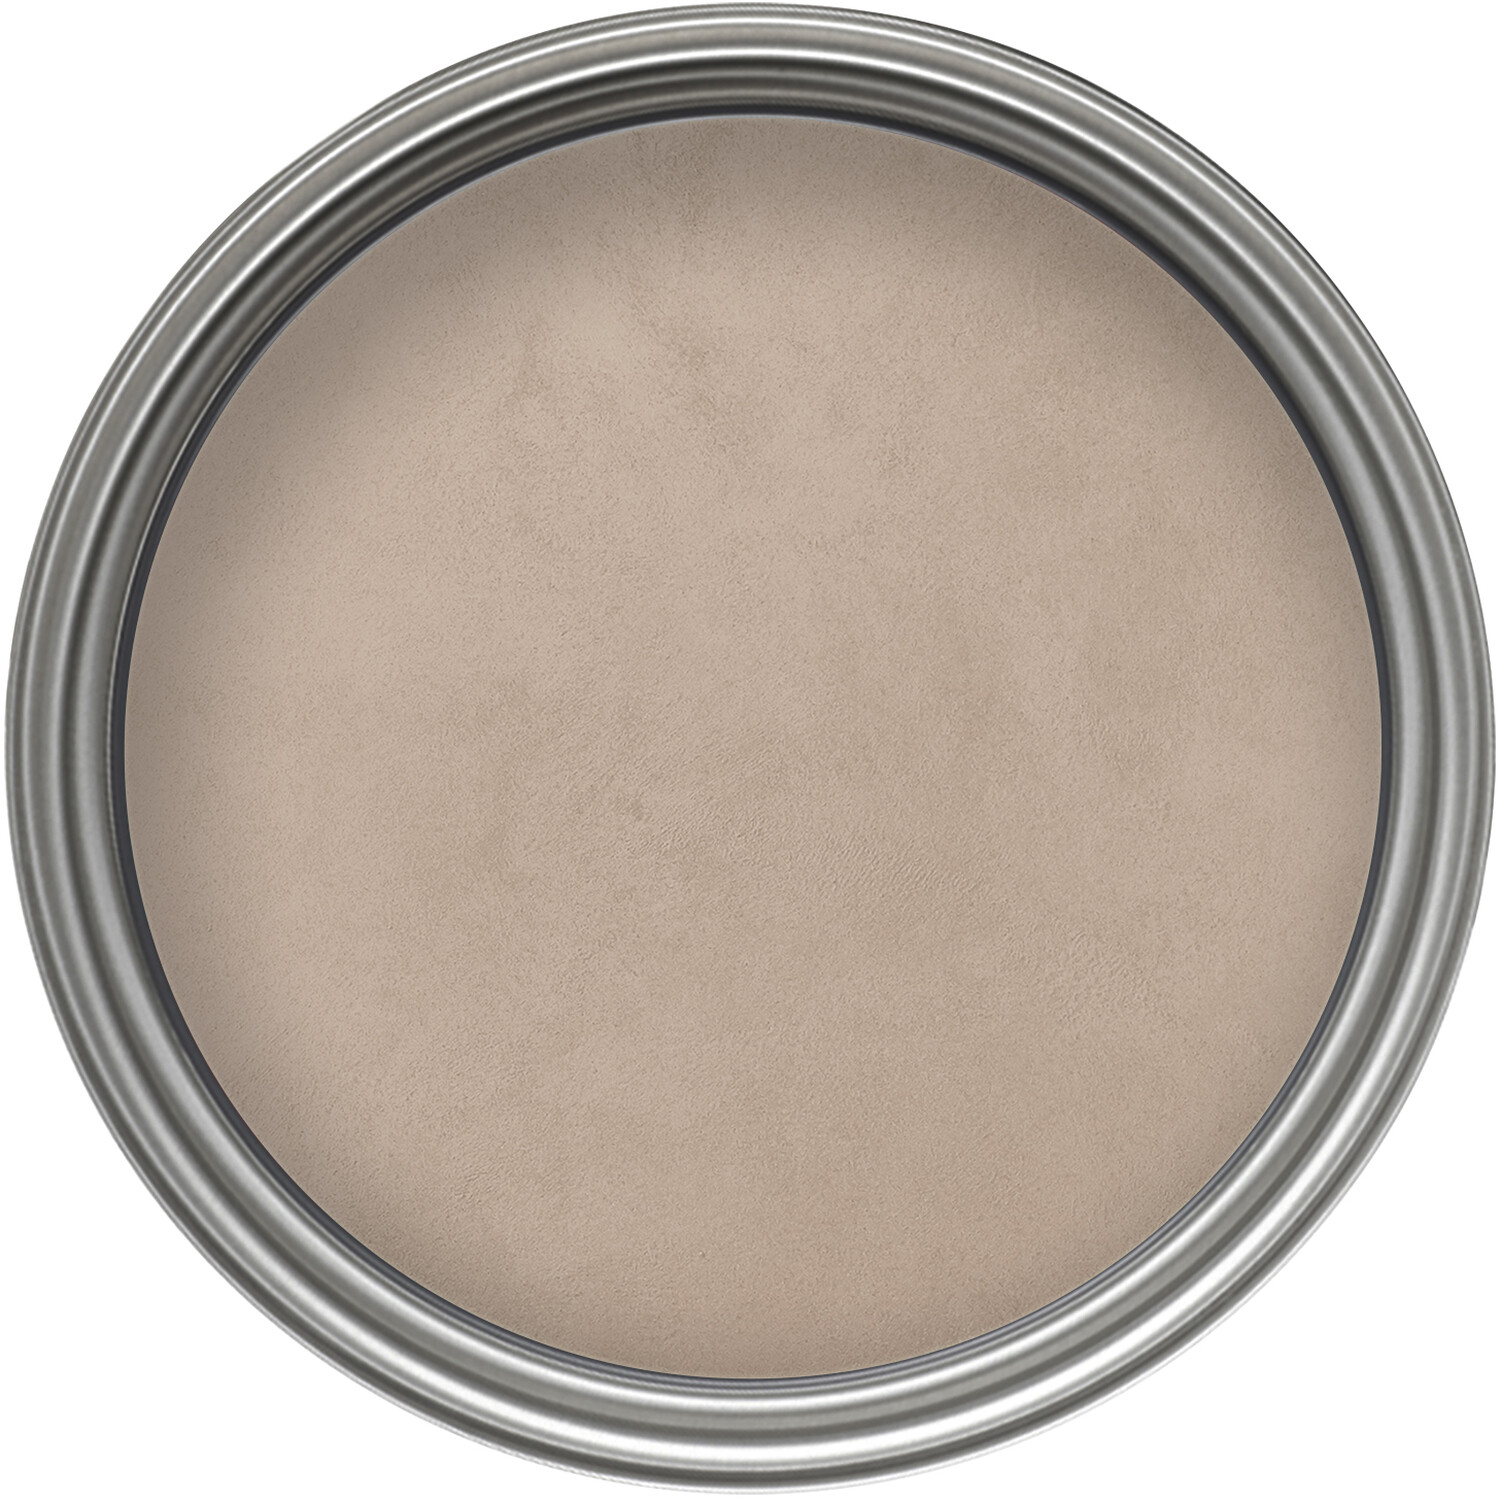 Crown Crafted Walls Taupe Suede Textured Finish Paint 2.5L Image 3